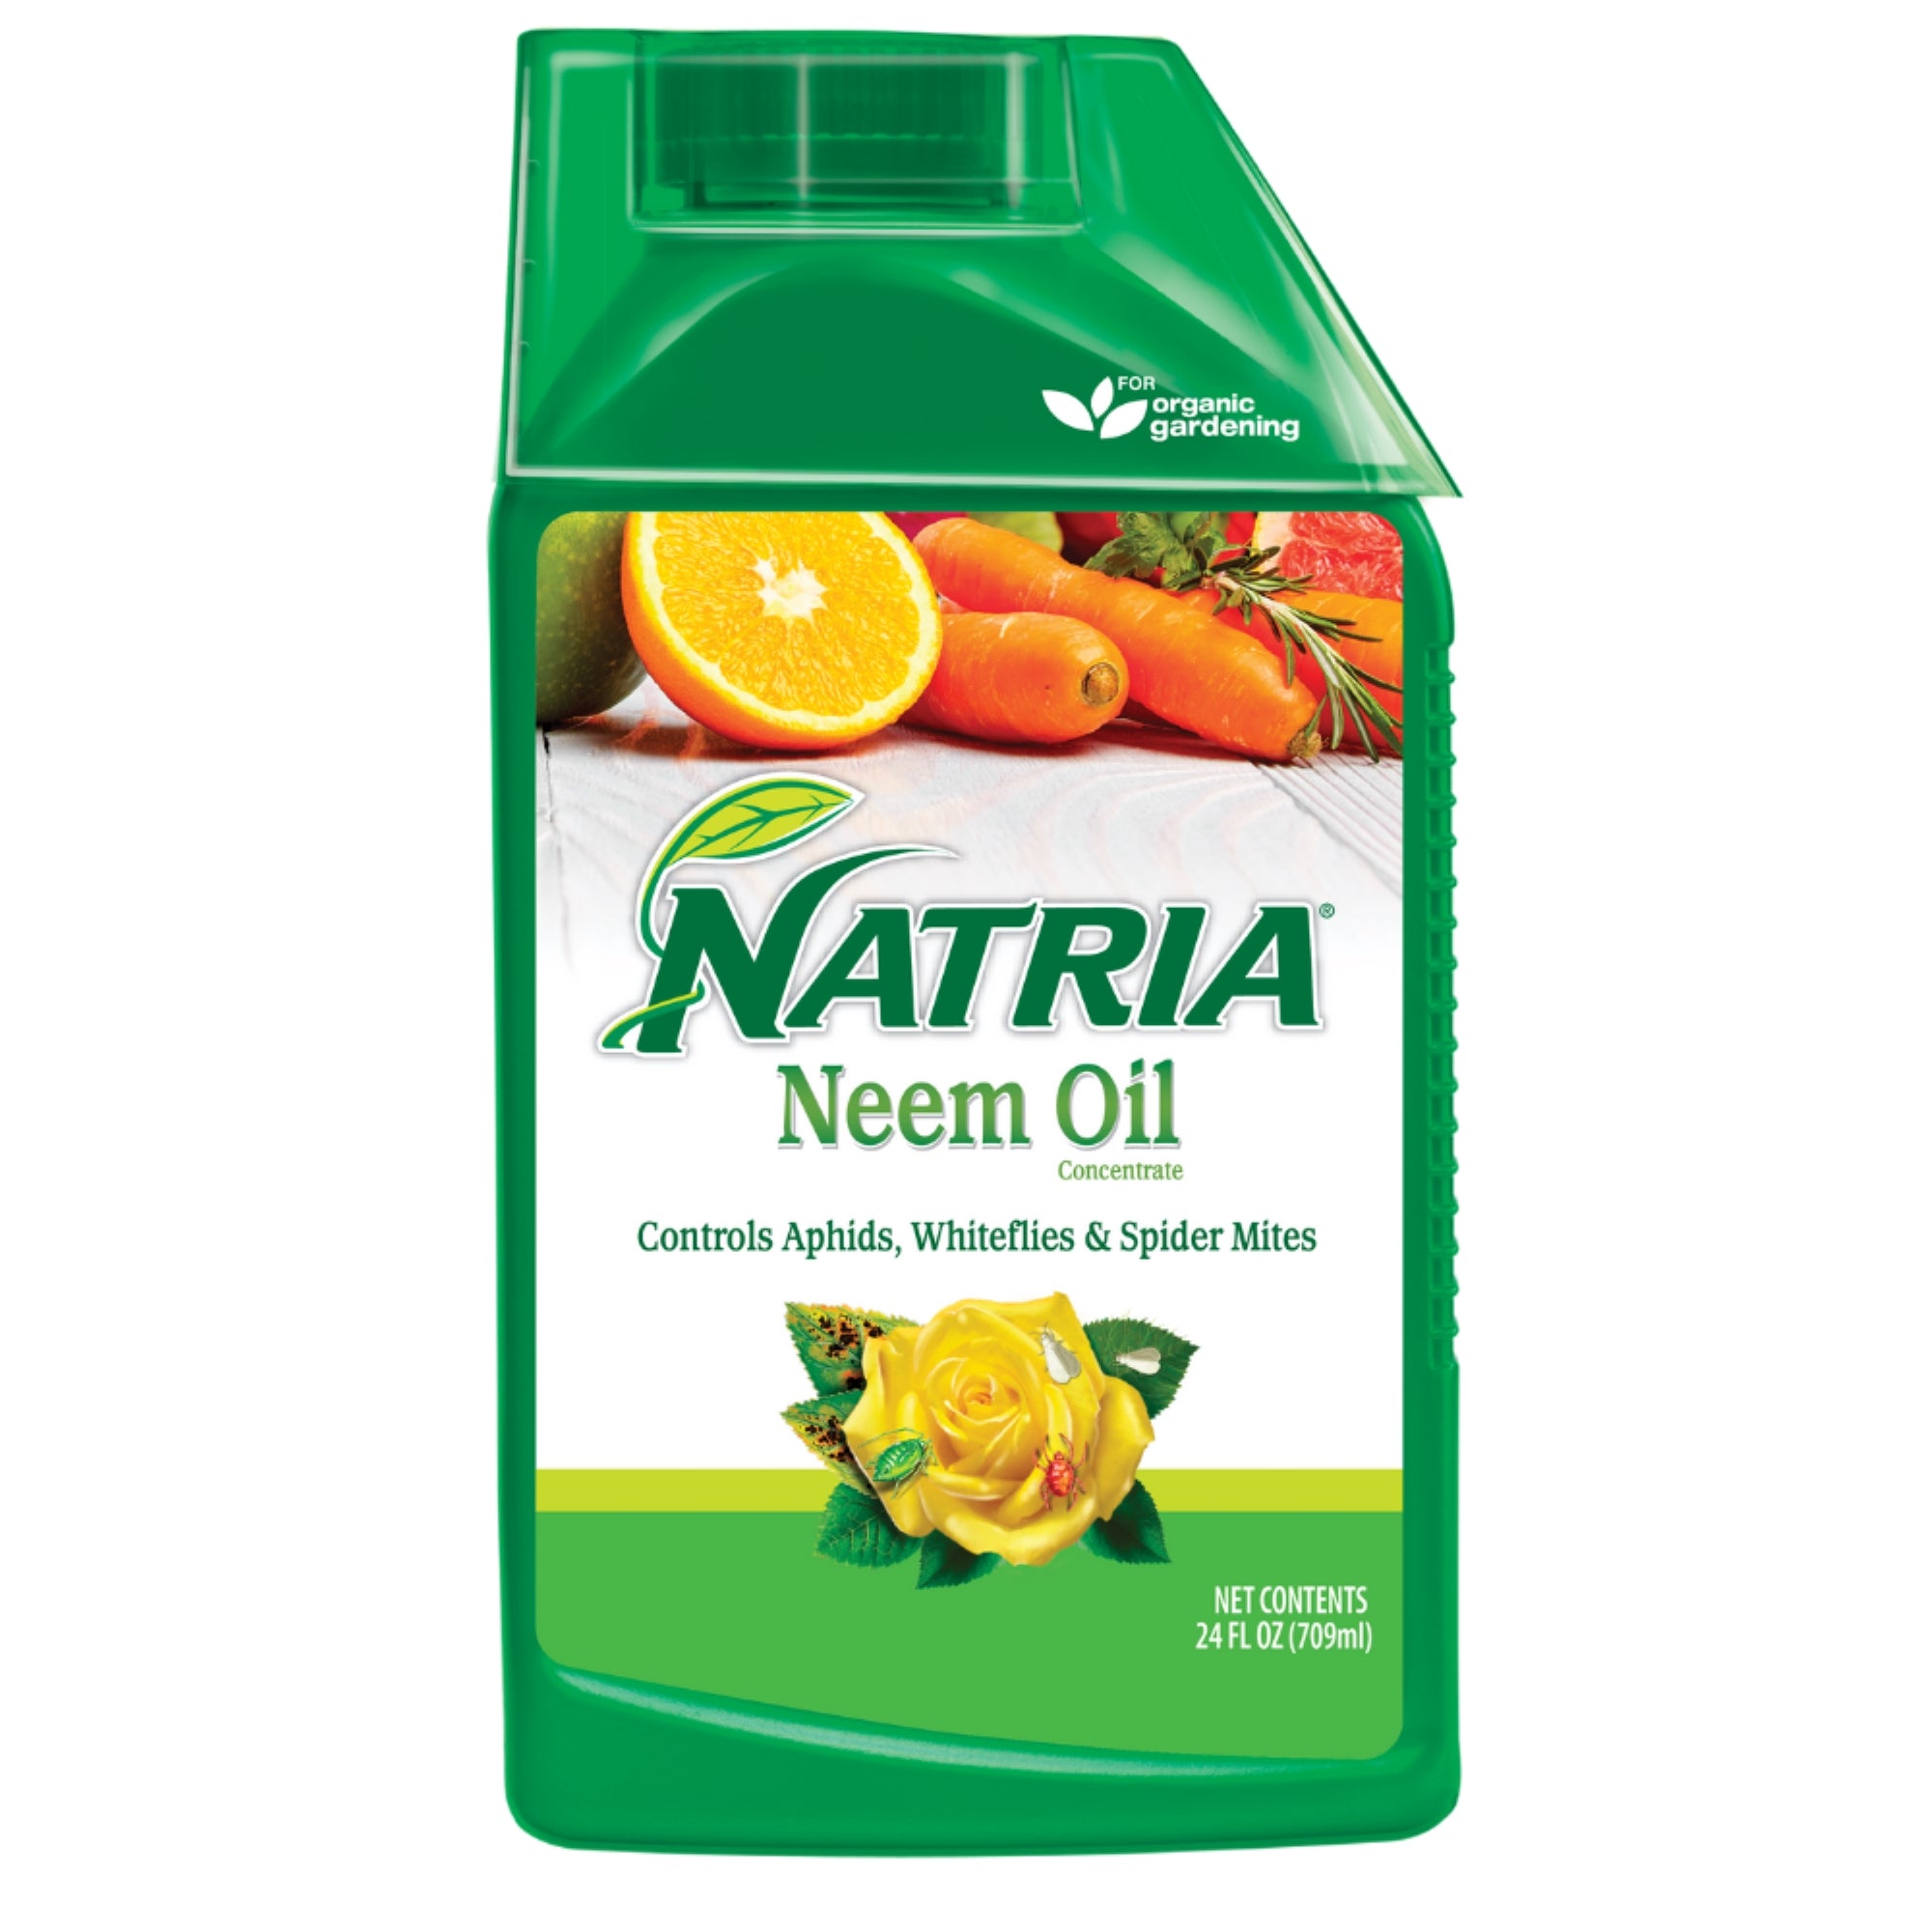 Natria Neem Oil for Flowers, Fruits and Vegetables, Concentrate, 24 oz